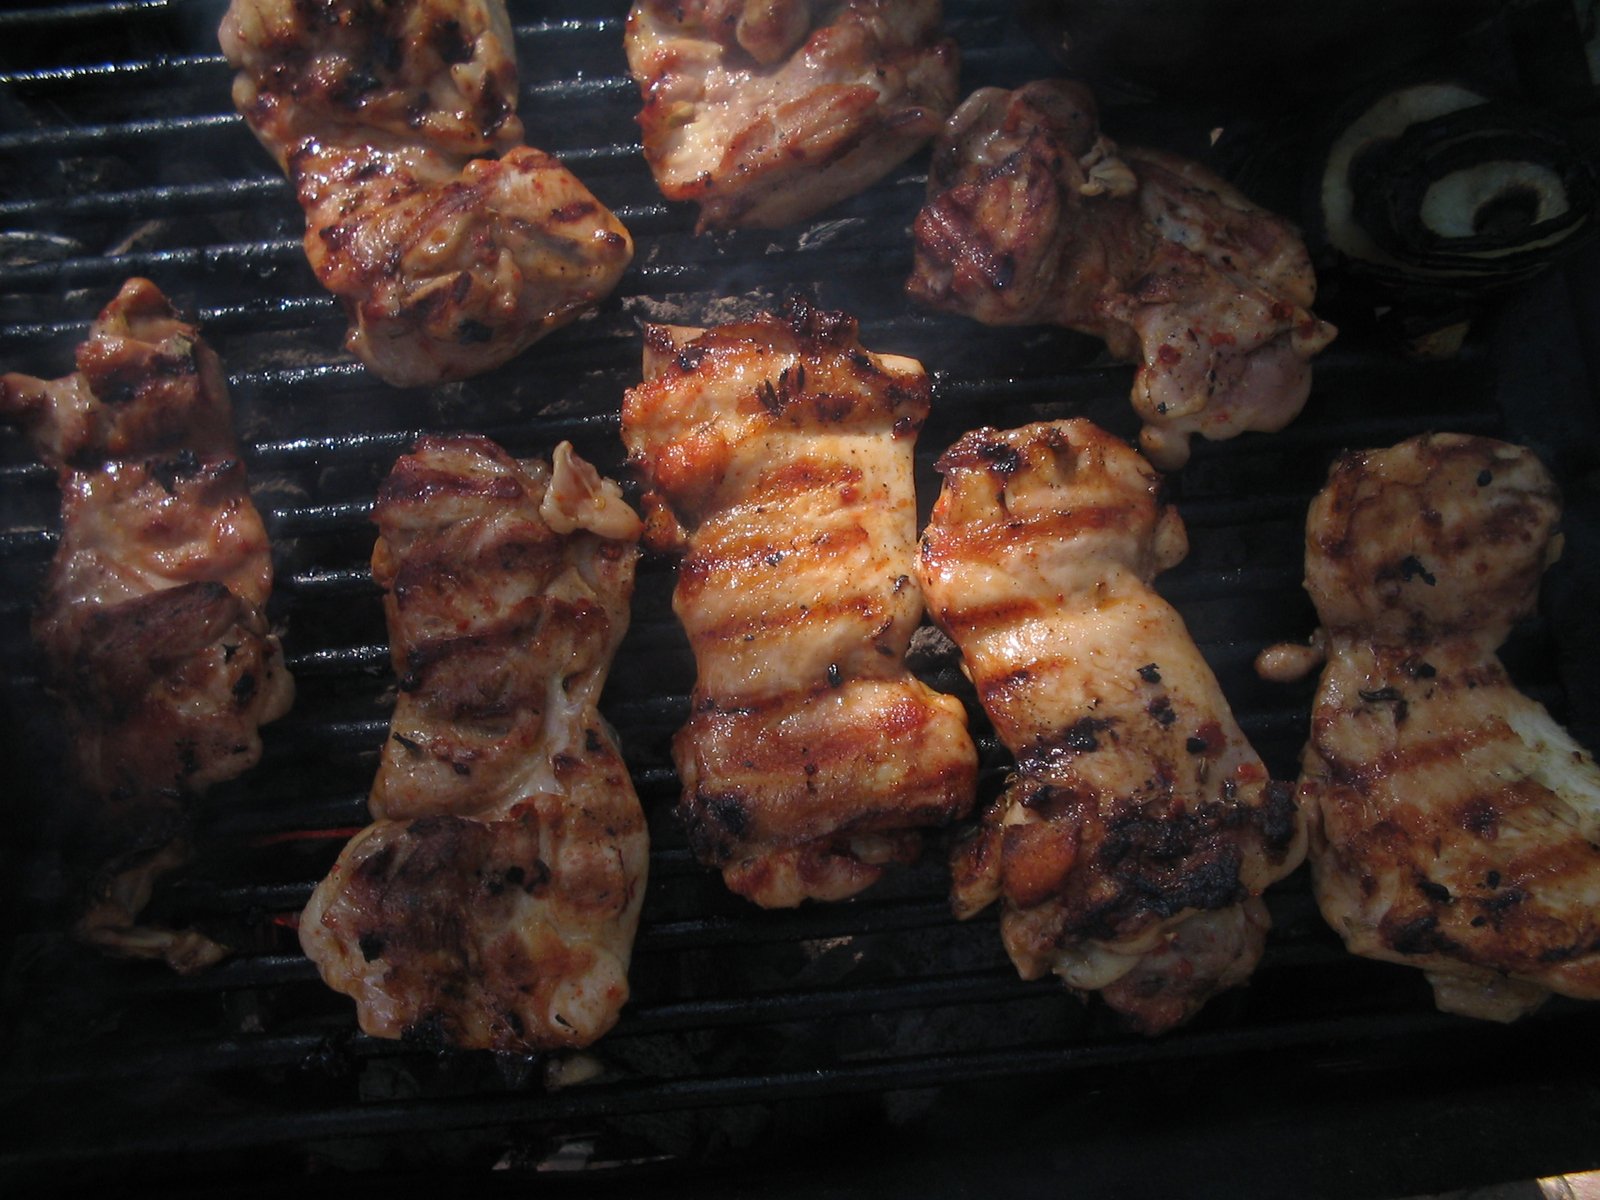 a bbq with chicken and other food being prepared on a grill